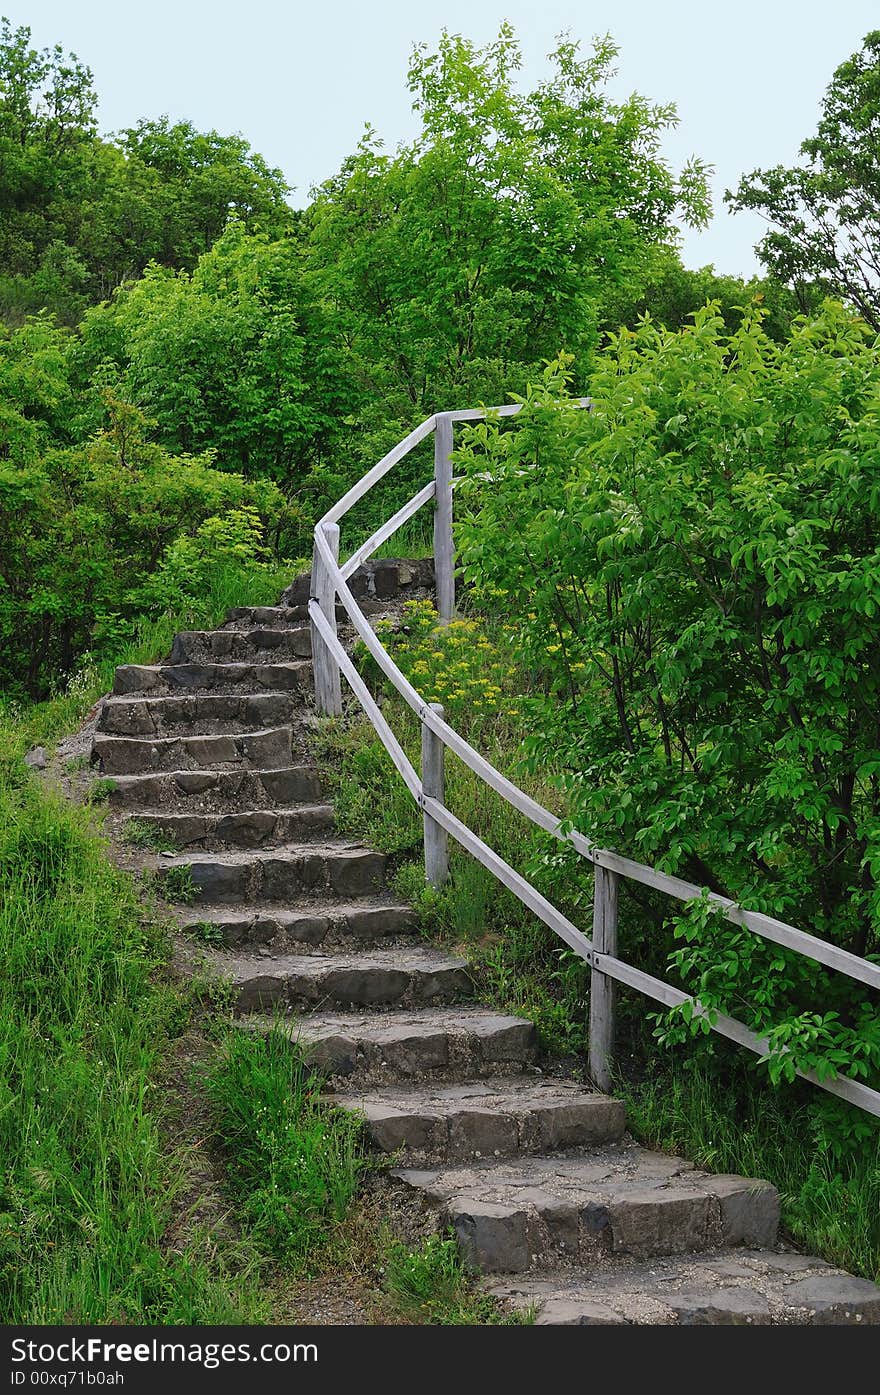 Stone stairs in the green forest with banisters. Stone stairs in the green forest with banisters.